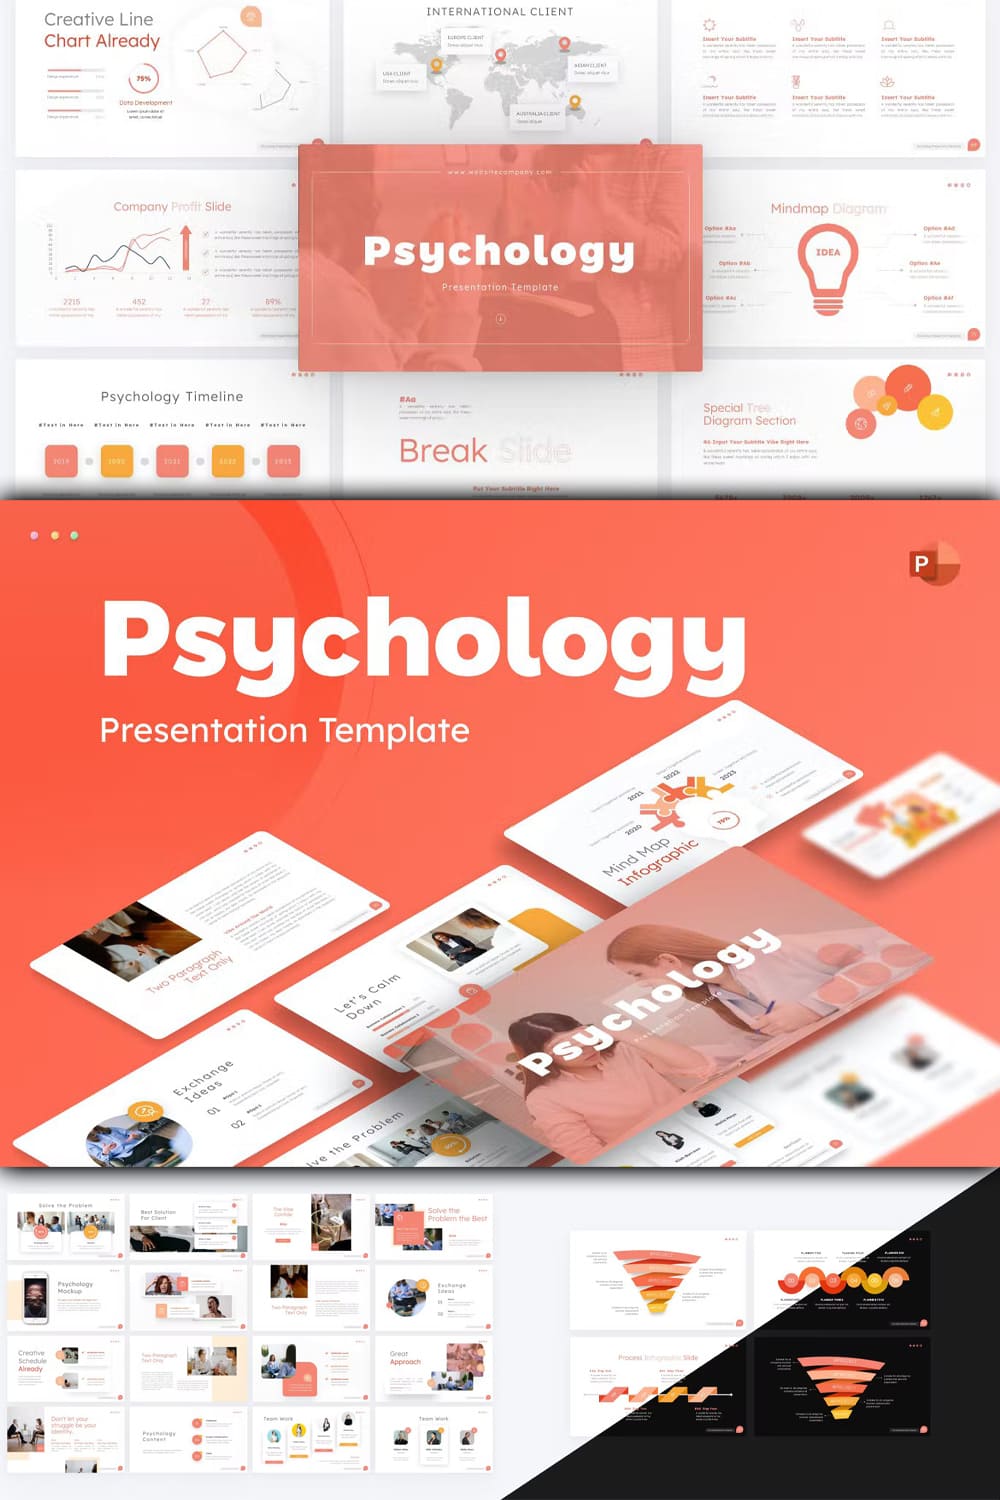 Psychology professional powerpoint template - pinterest image preview.